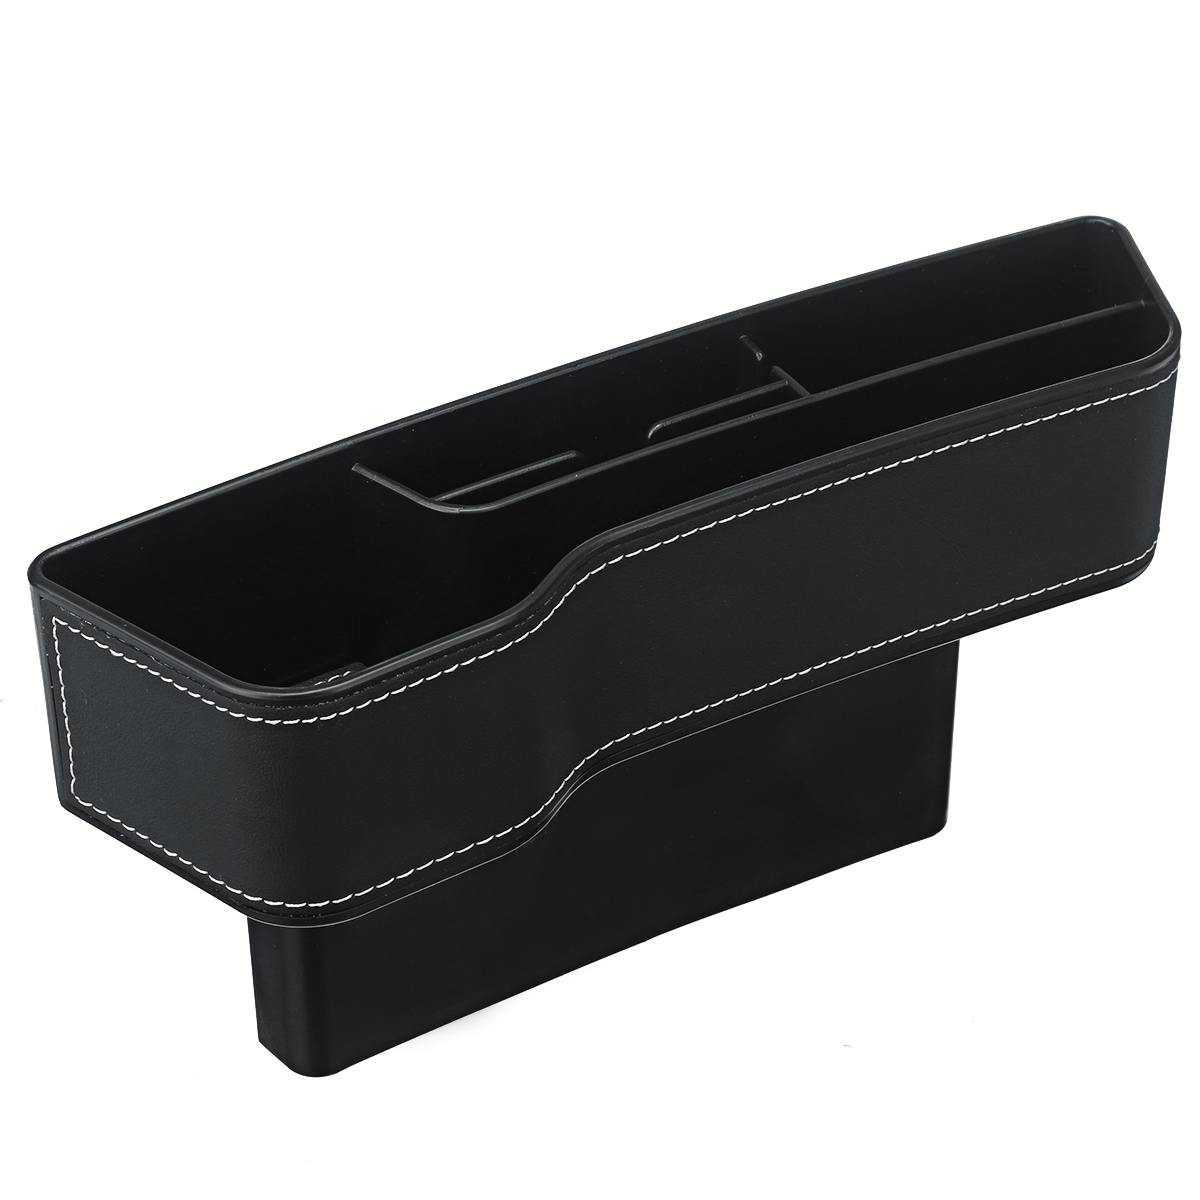 AUDEW Car Organizer Auto Seat Crevice Gaps Storage Box Cup Mobile Phone Holder for Pockets Stowing Tidying Organizer Car Accessories - Auto GoShop